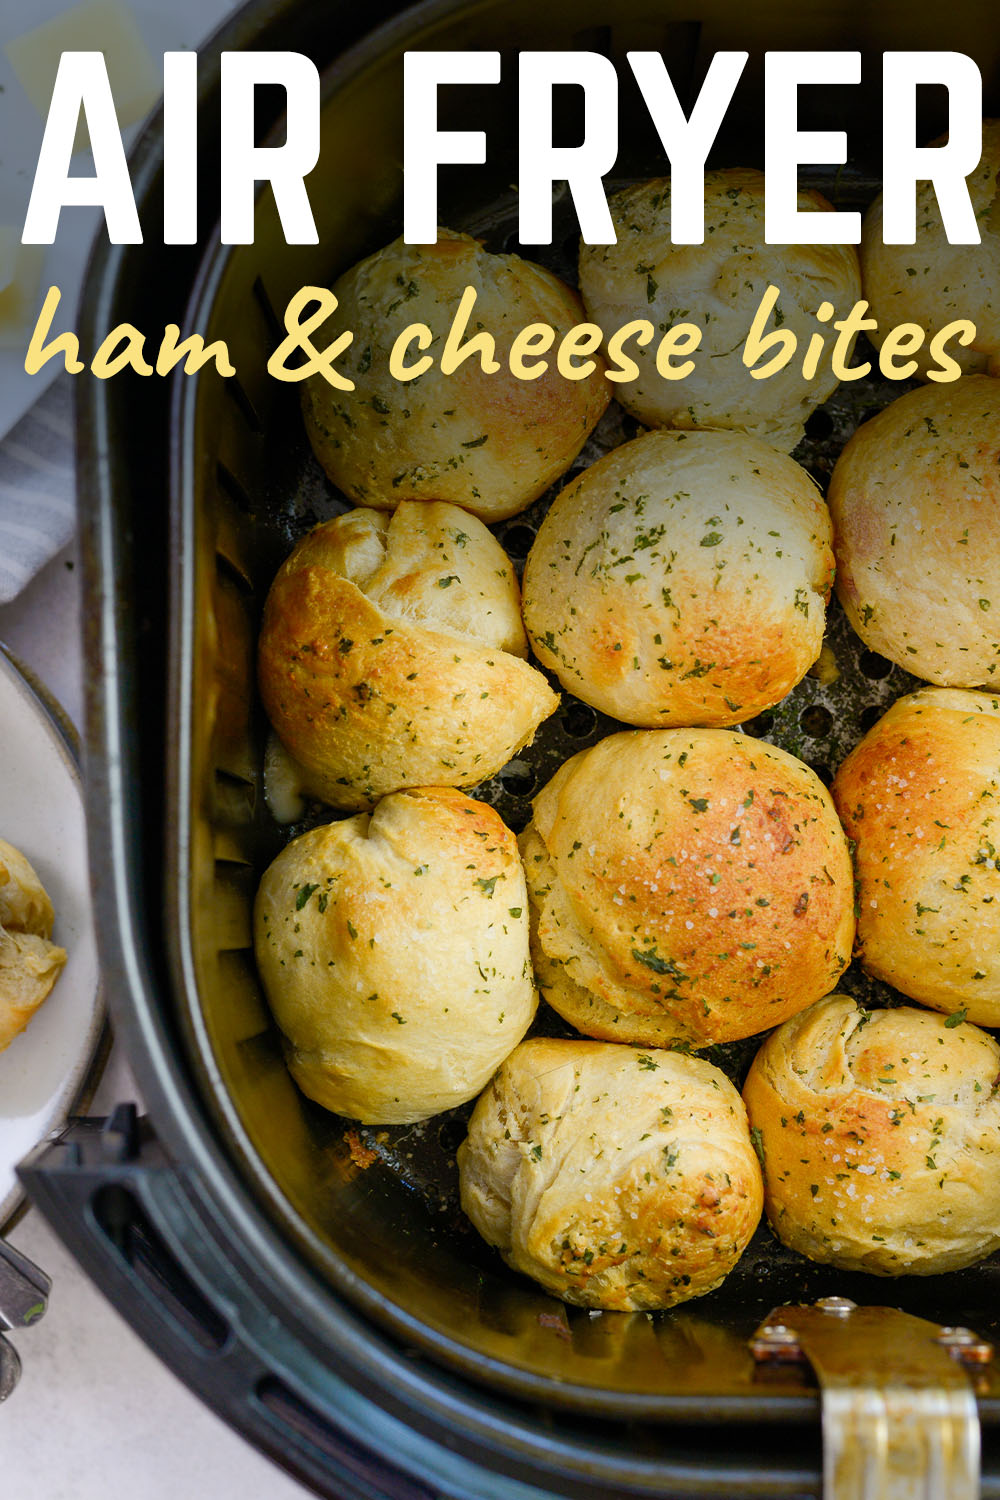 This air fryer ham and cheese bite recipe is a simple recipe for a snack or lunch to break you from the usual.  